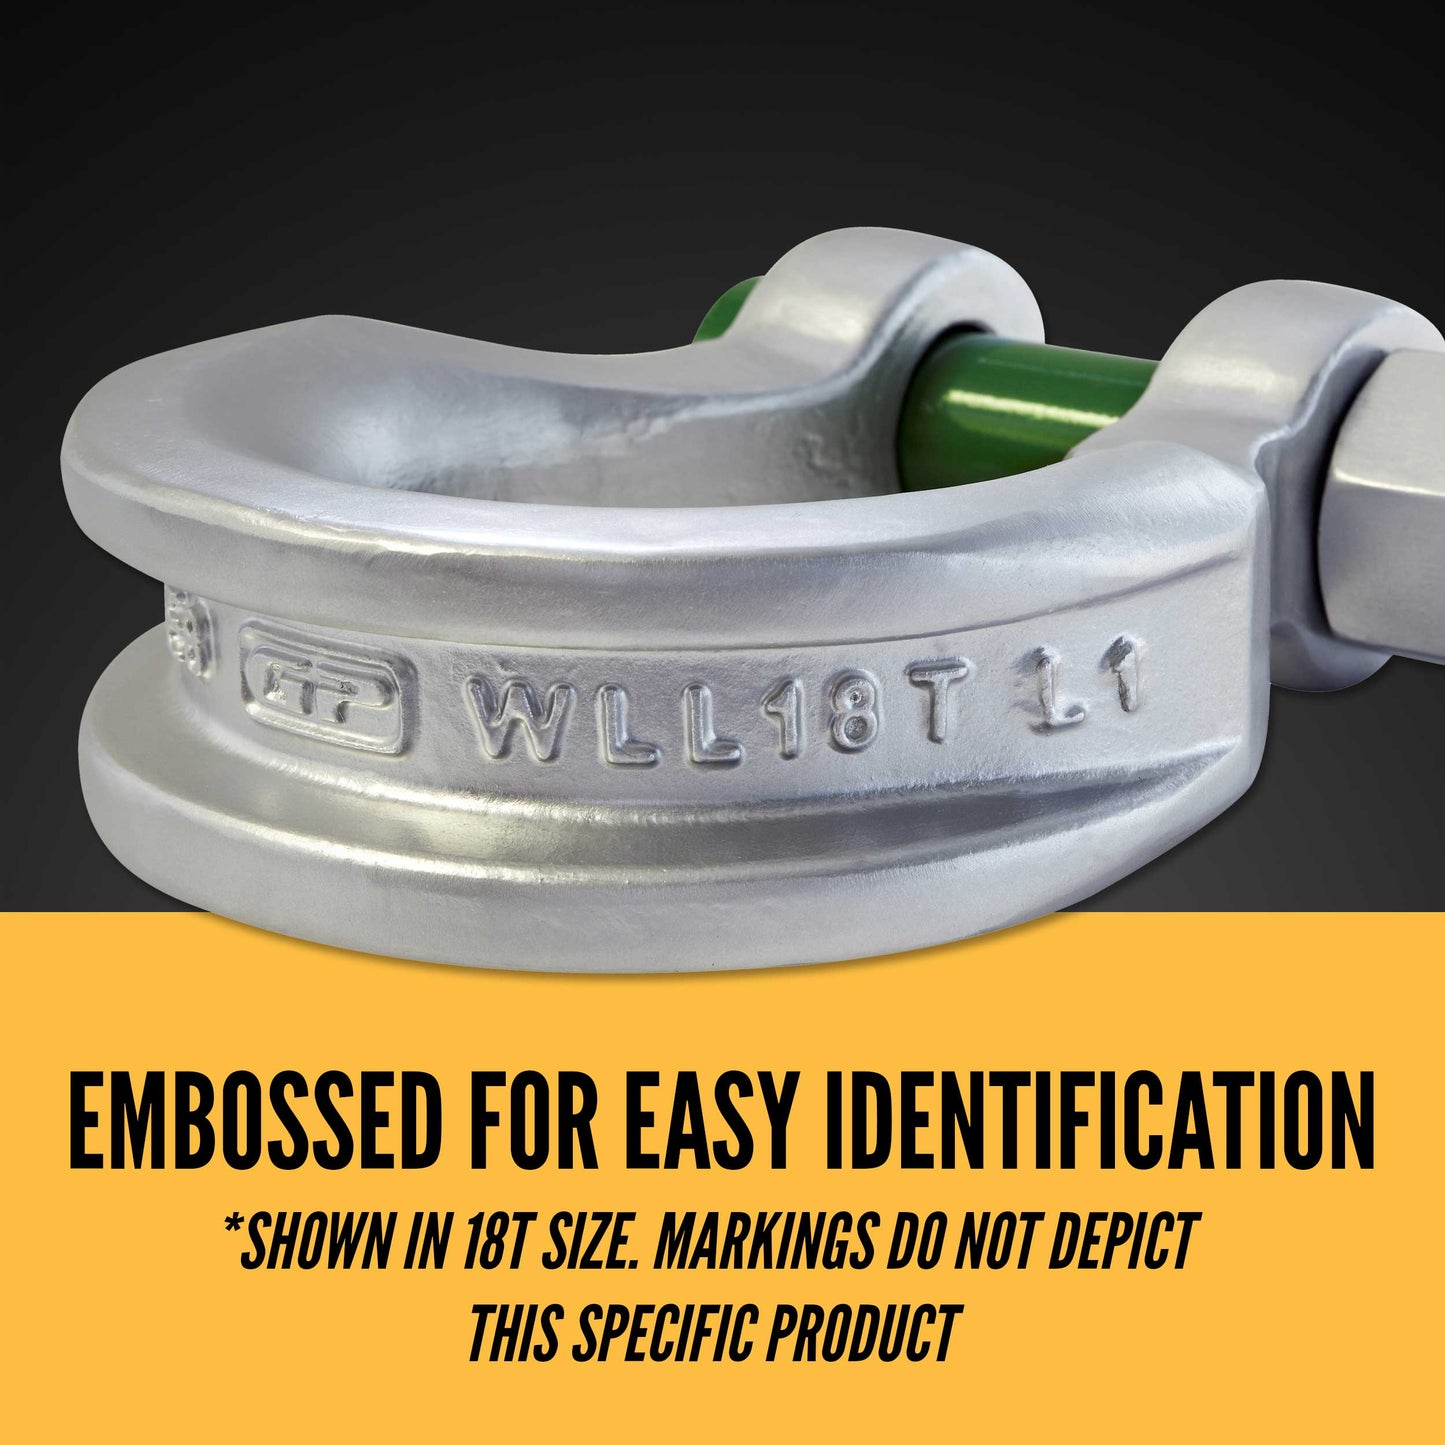 Van Beest Green Pin Bolt Type Wide Body Sling Shackle | P-6033 - 300 Ton embossed for easy identification